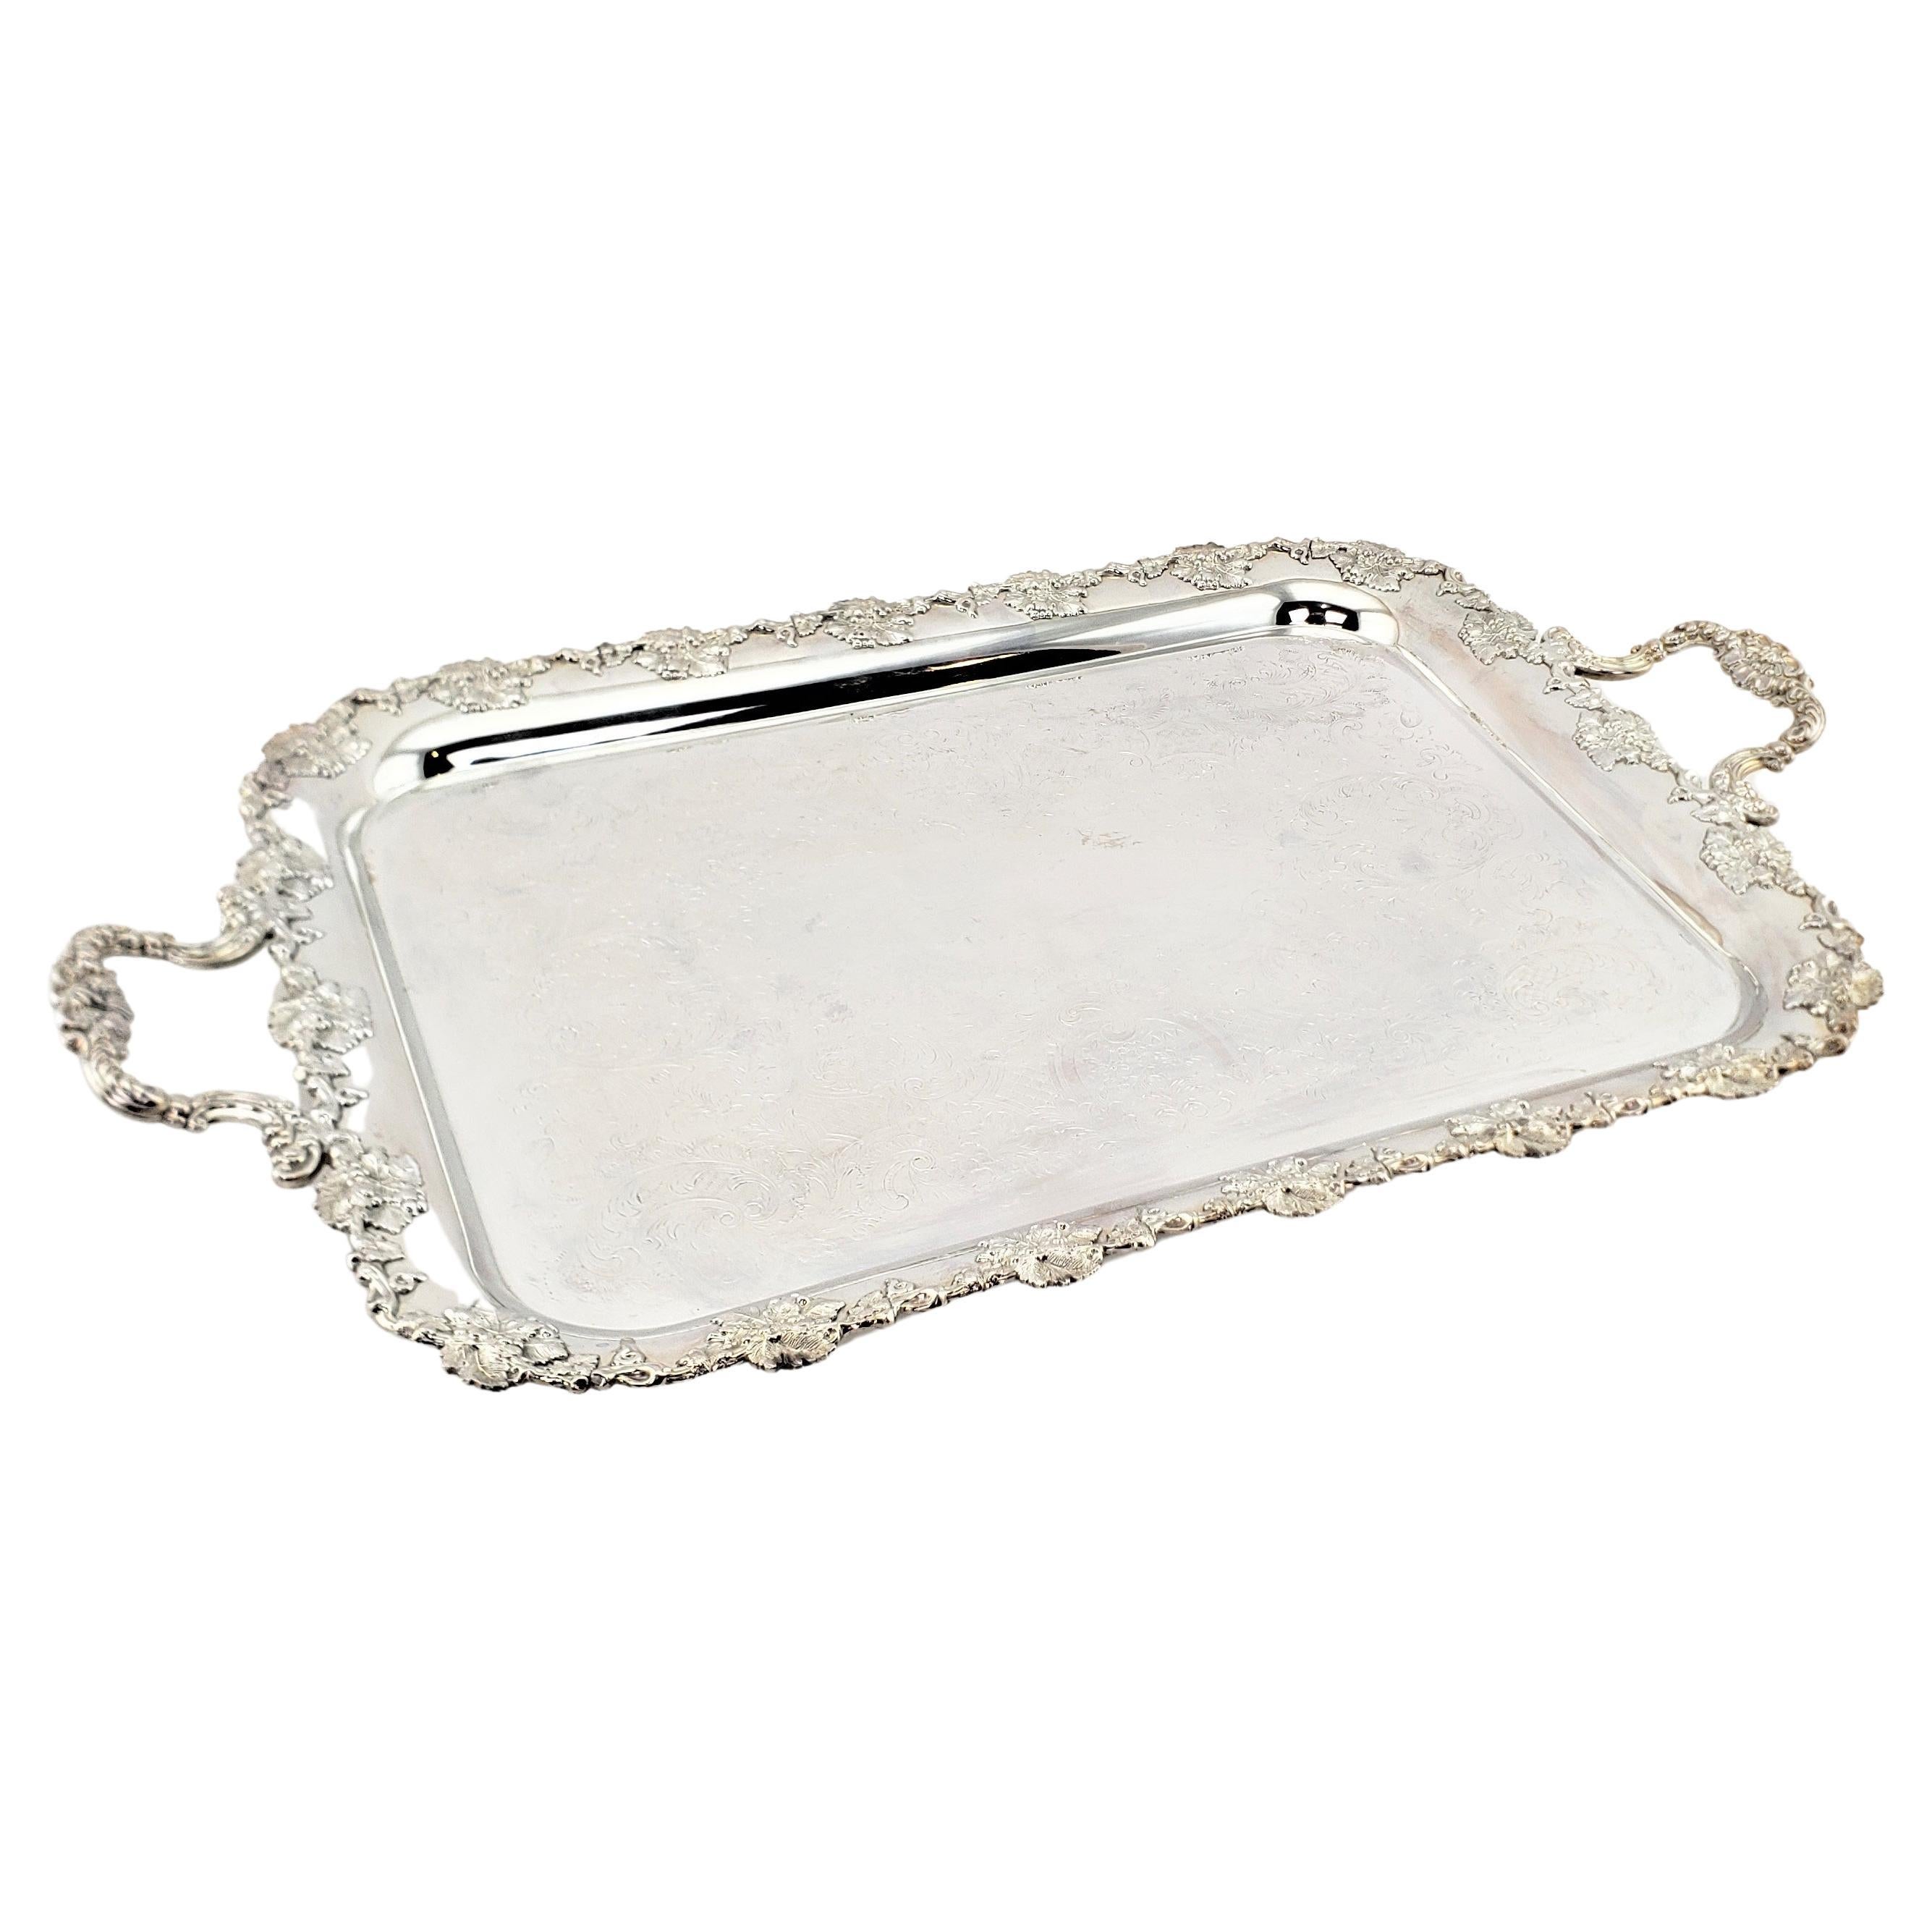 Antique Barker-Ellis Silver Plated Serving Tray with Berry & Leaf Decoration For Sale